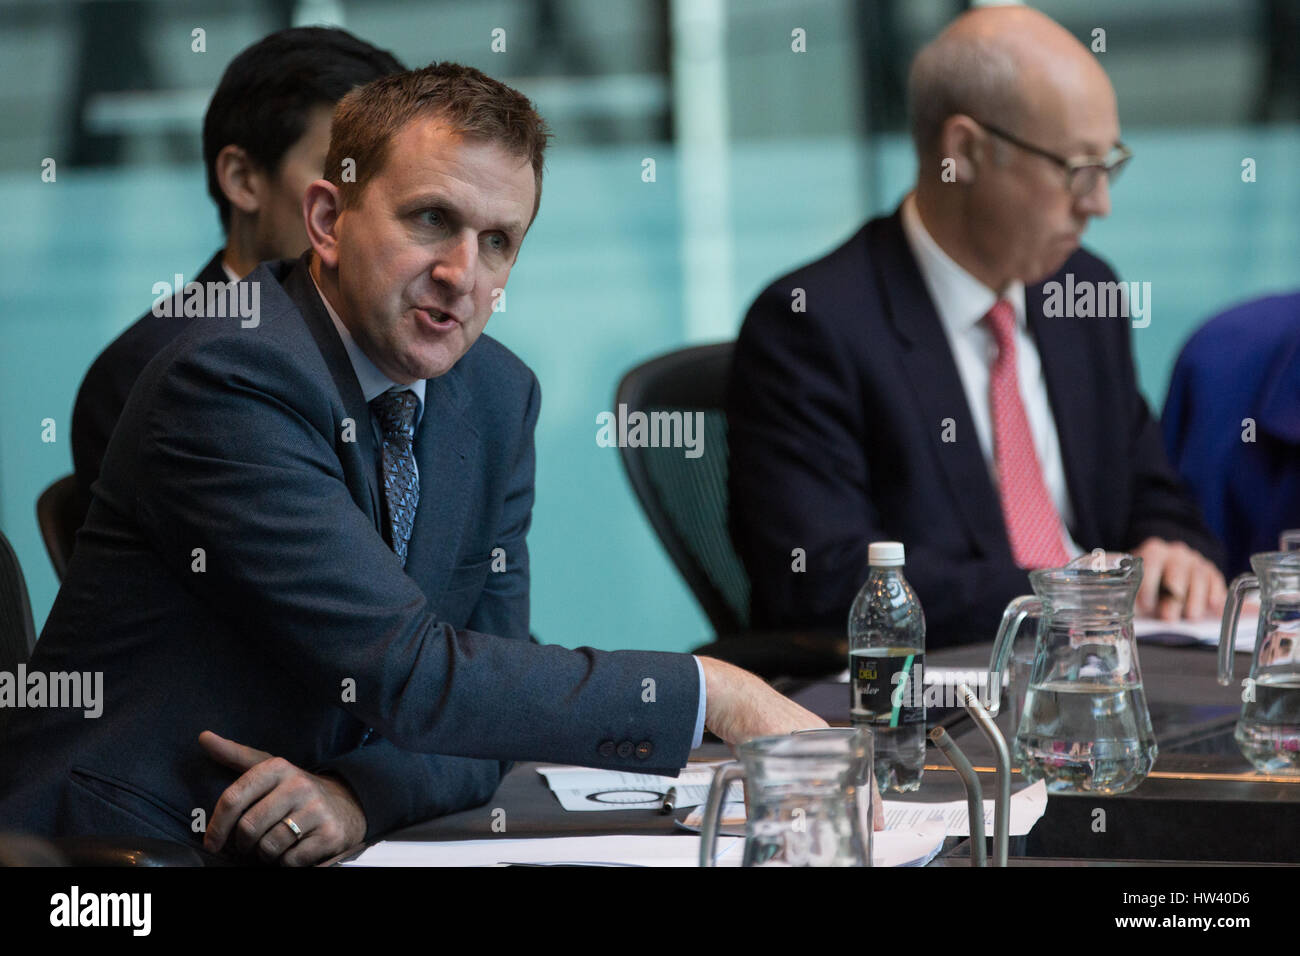 London, UK. 16th March, 2017. Matt Gorman, Director of Sustainability and Environment at Heathrow Airport, addresses the London Assembly Environment Committee during a debate on Heathrow expansion in the Chamber at City Hall. Credit: Mark Kerrison/Alamy Live News Stock Photo